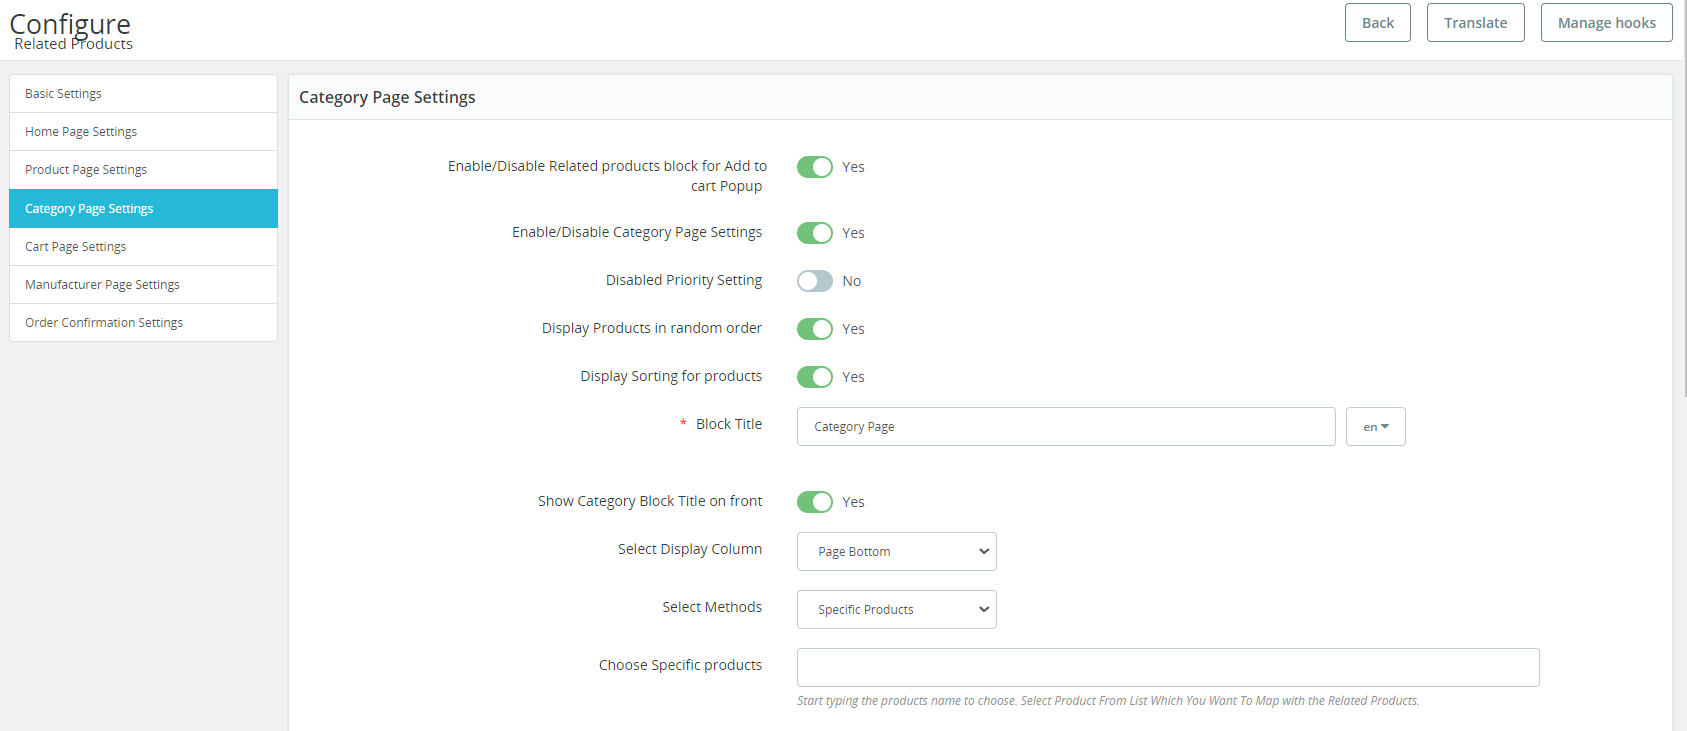 prestashop-related-products-category-page-settings